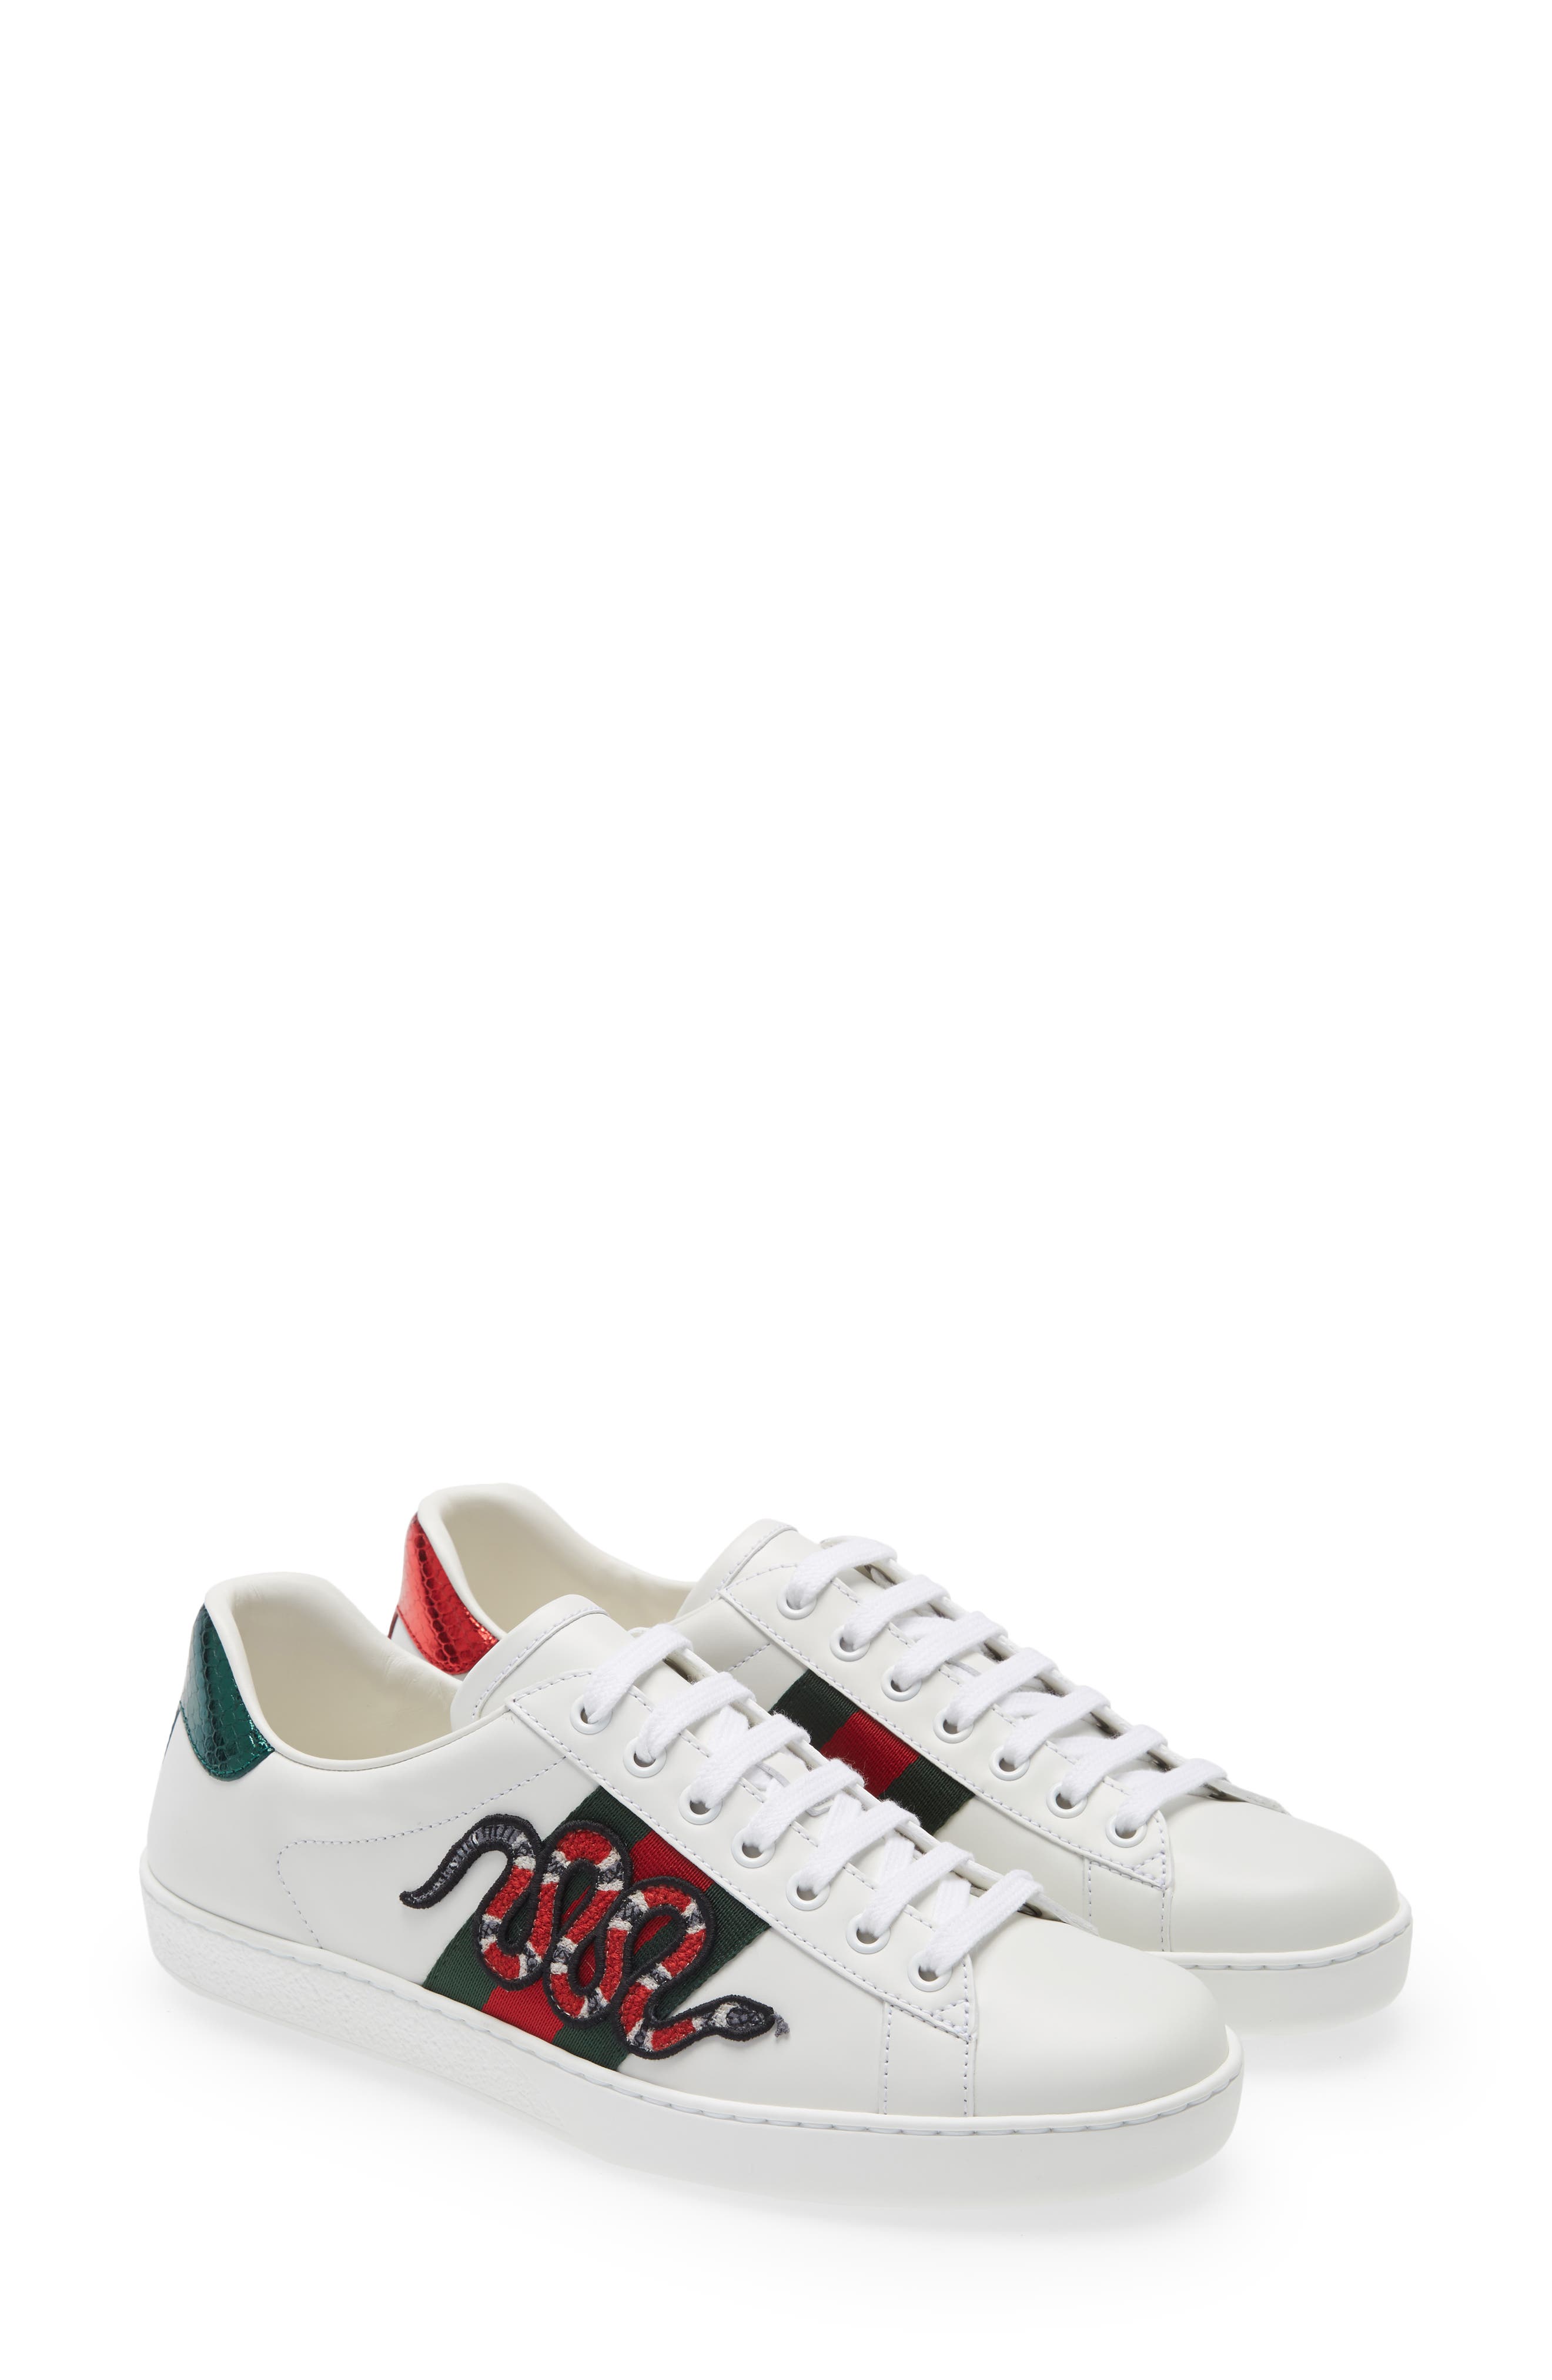 gucci white sneakers mens